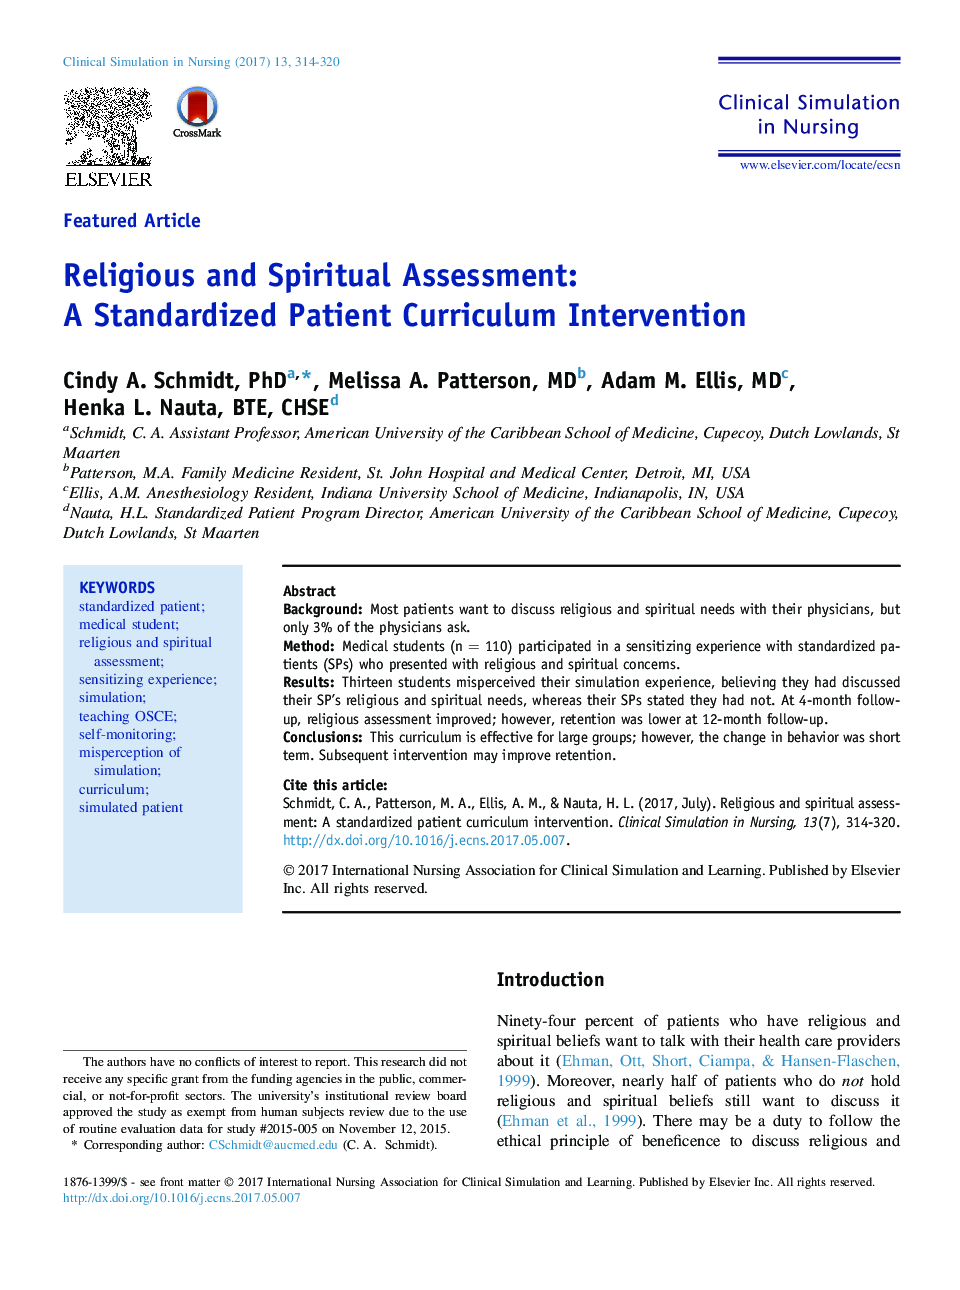 Religious and Spiritual Assessment: AÂ Standardized Patient Curriculum Intervention